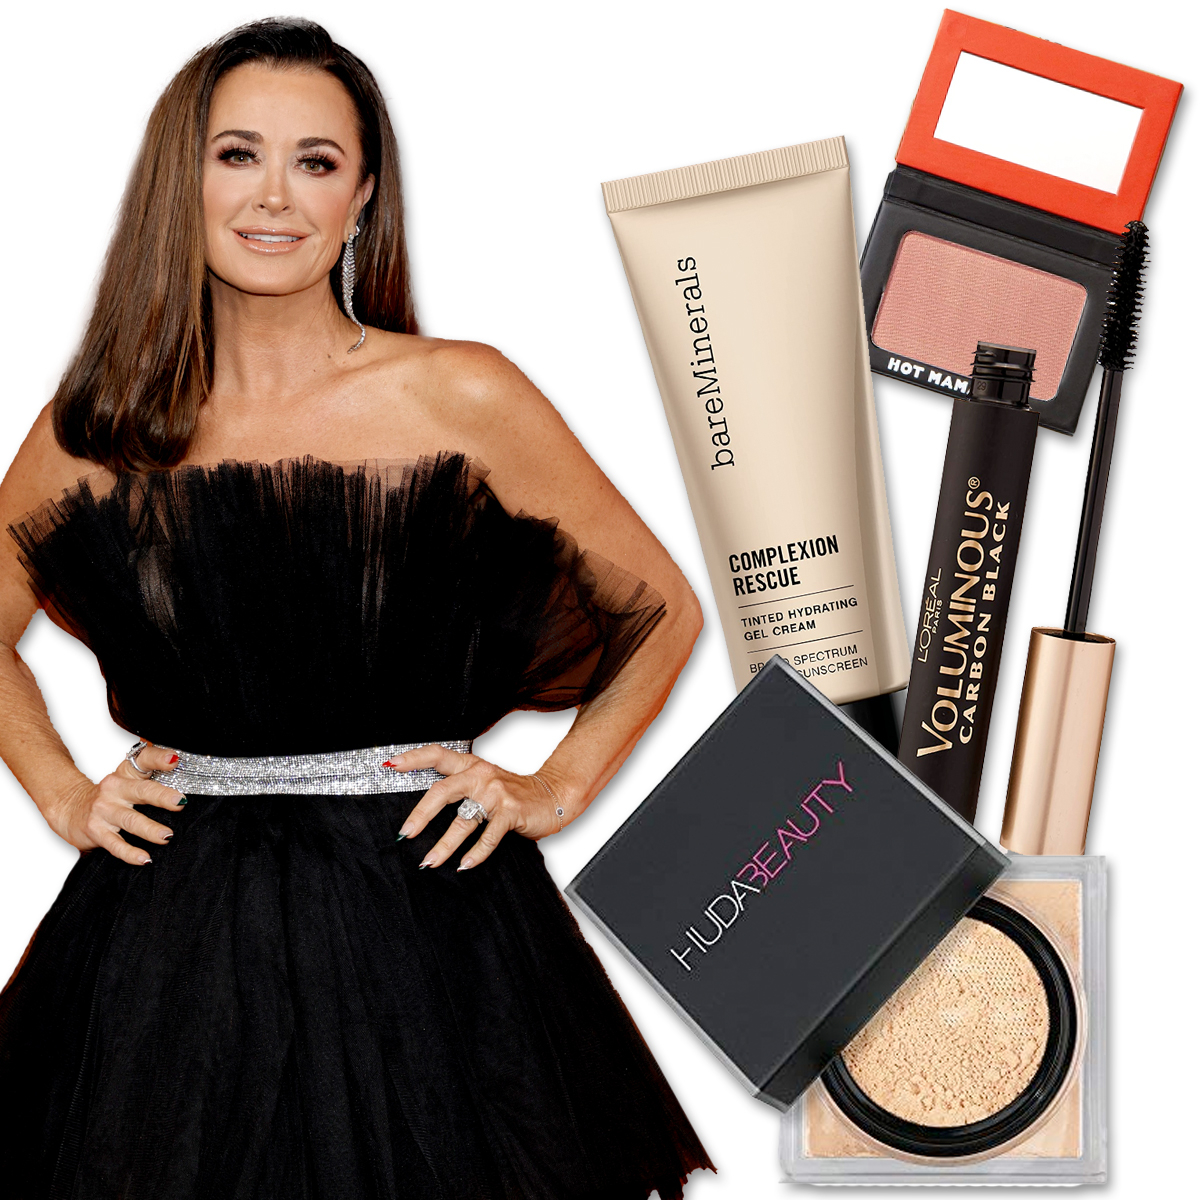 Kyle Richards Reveals $7 At Home Hair Dyeing Routine